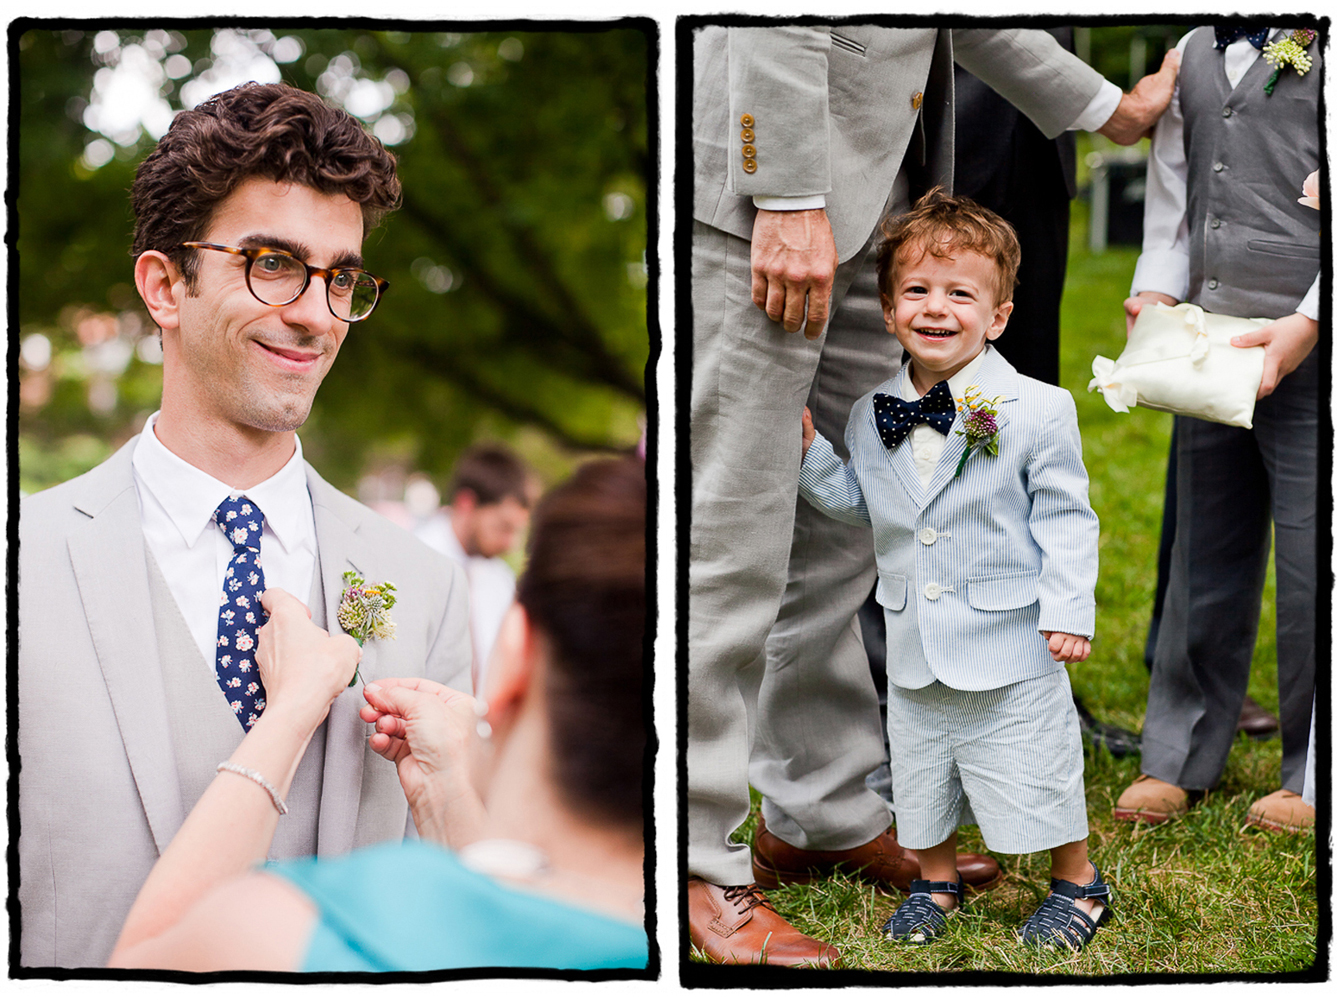 Michael and his ringbearer wore summery light grey suits at this New Jersey wedding featuring vintage and DIY decor.